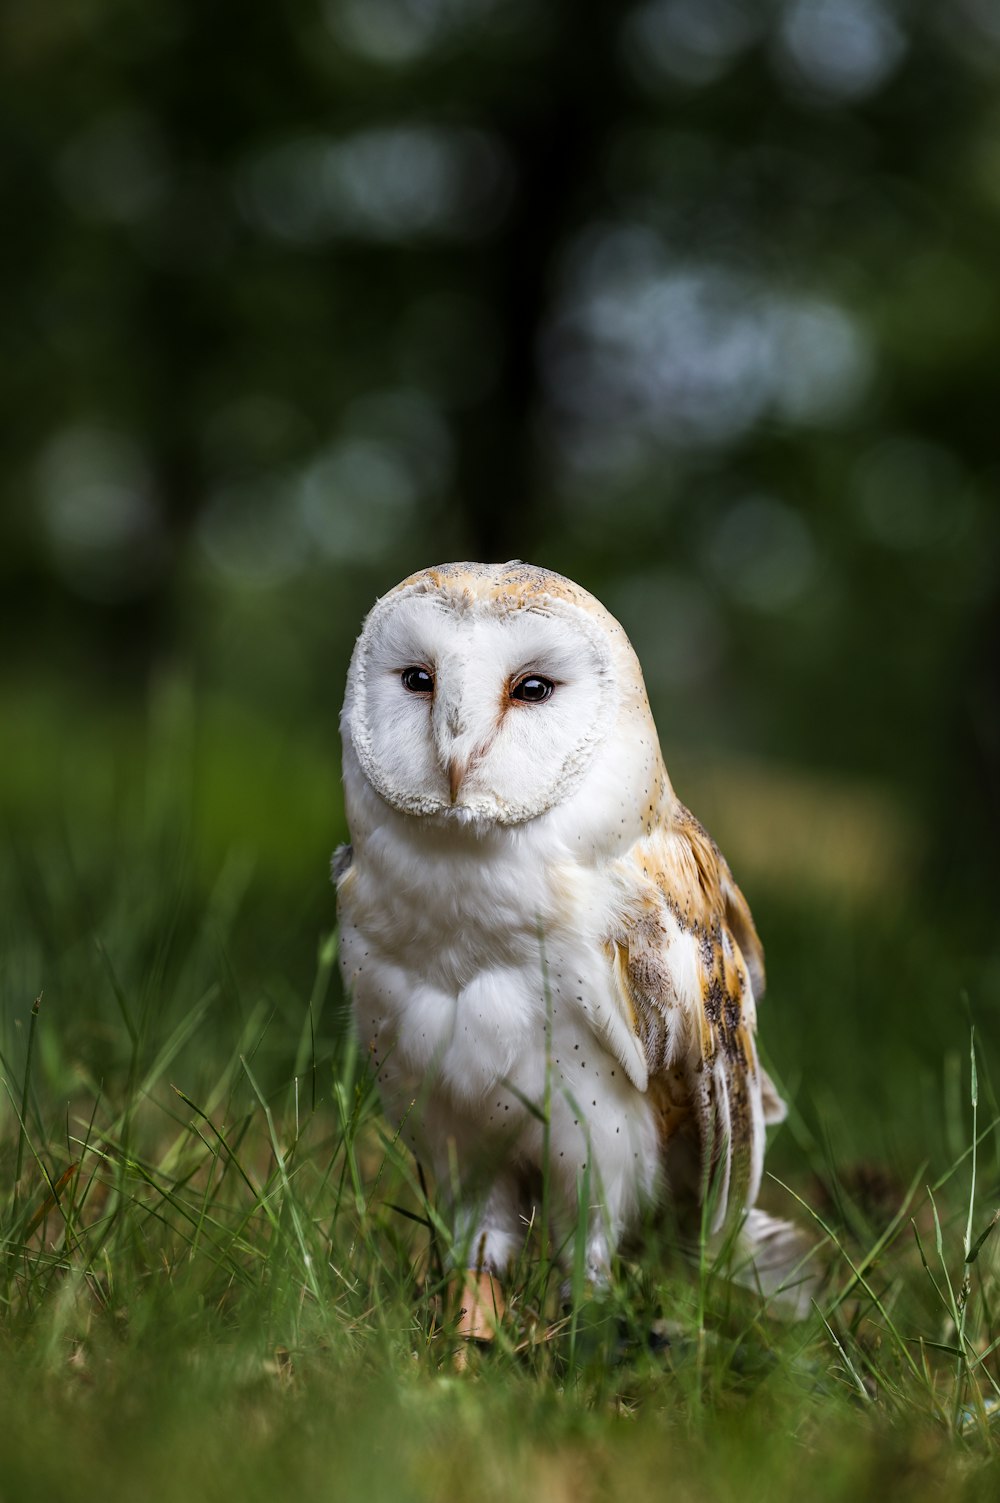 white and brown owl on grassy field